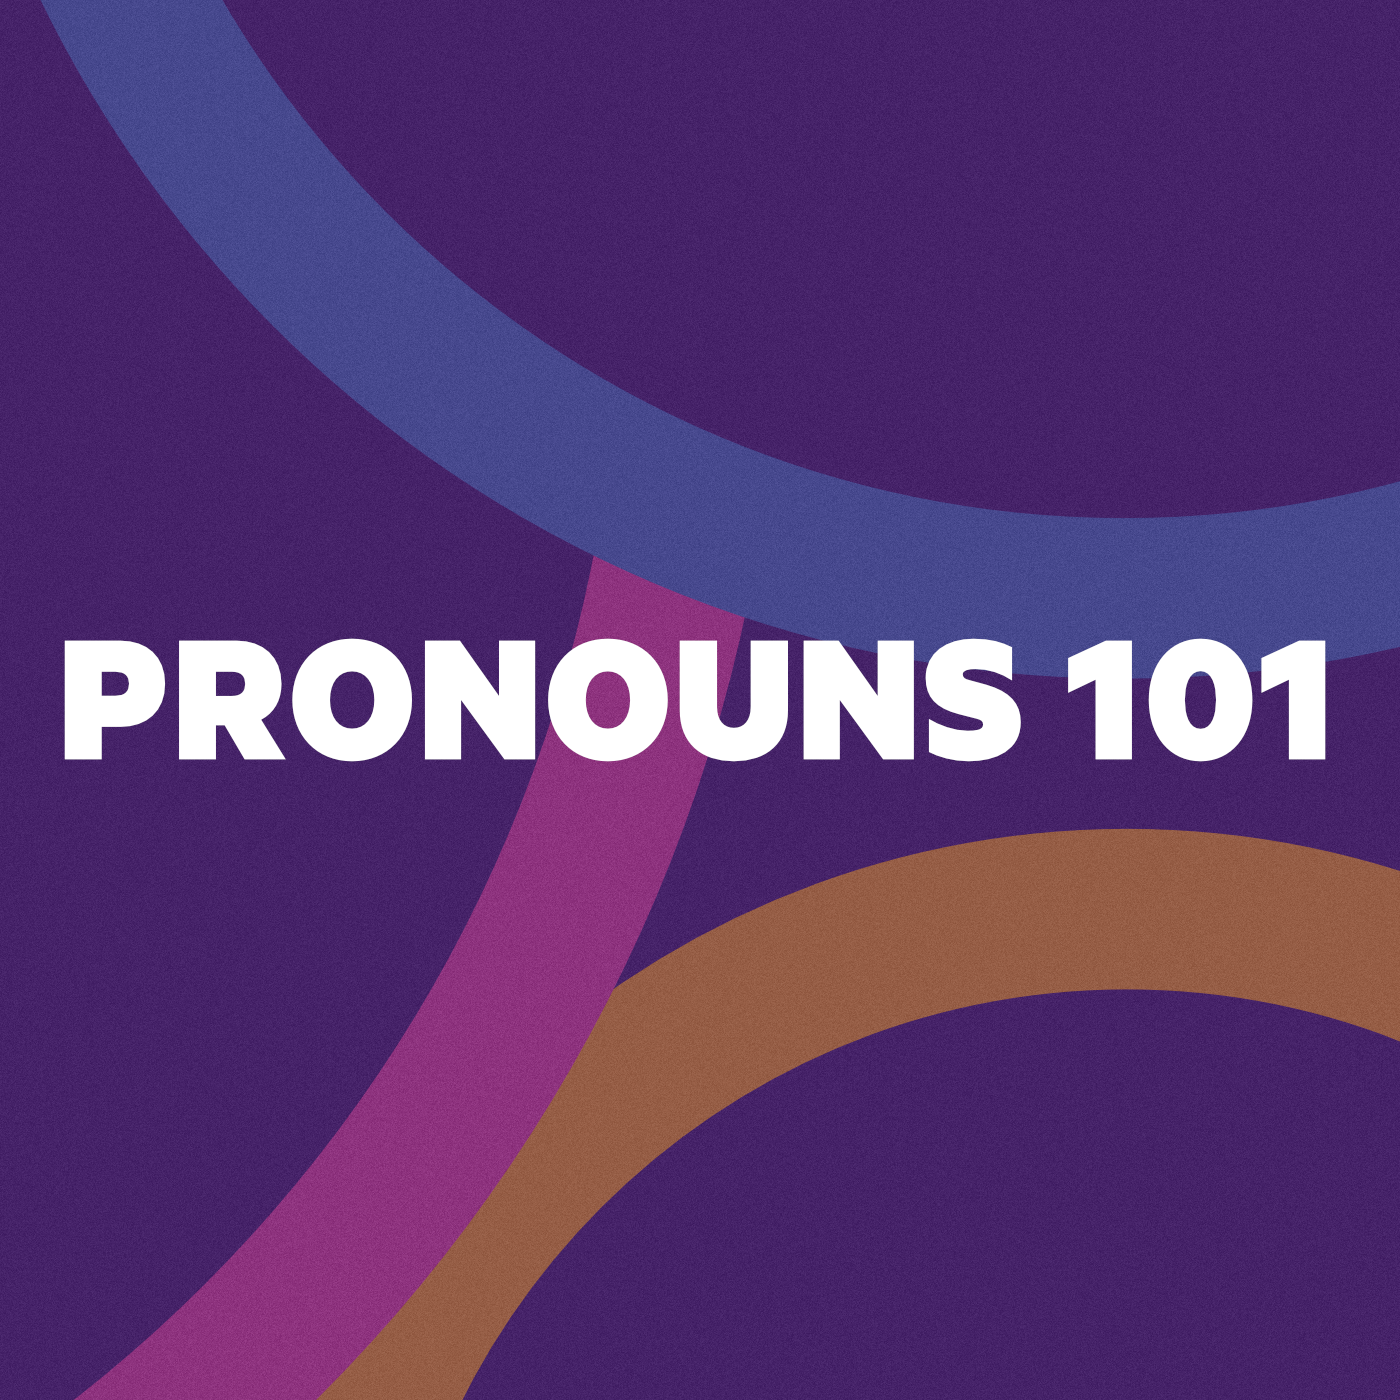 Pronouns 101: How to use pronouns in everyday life